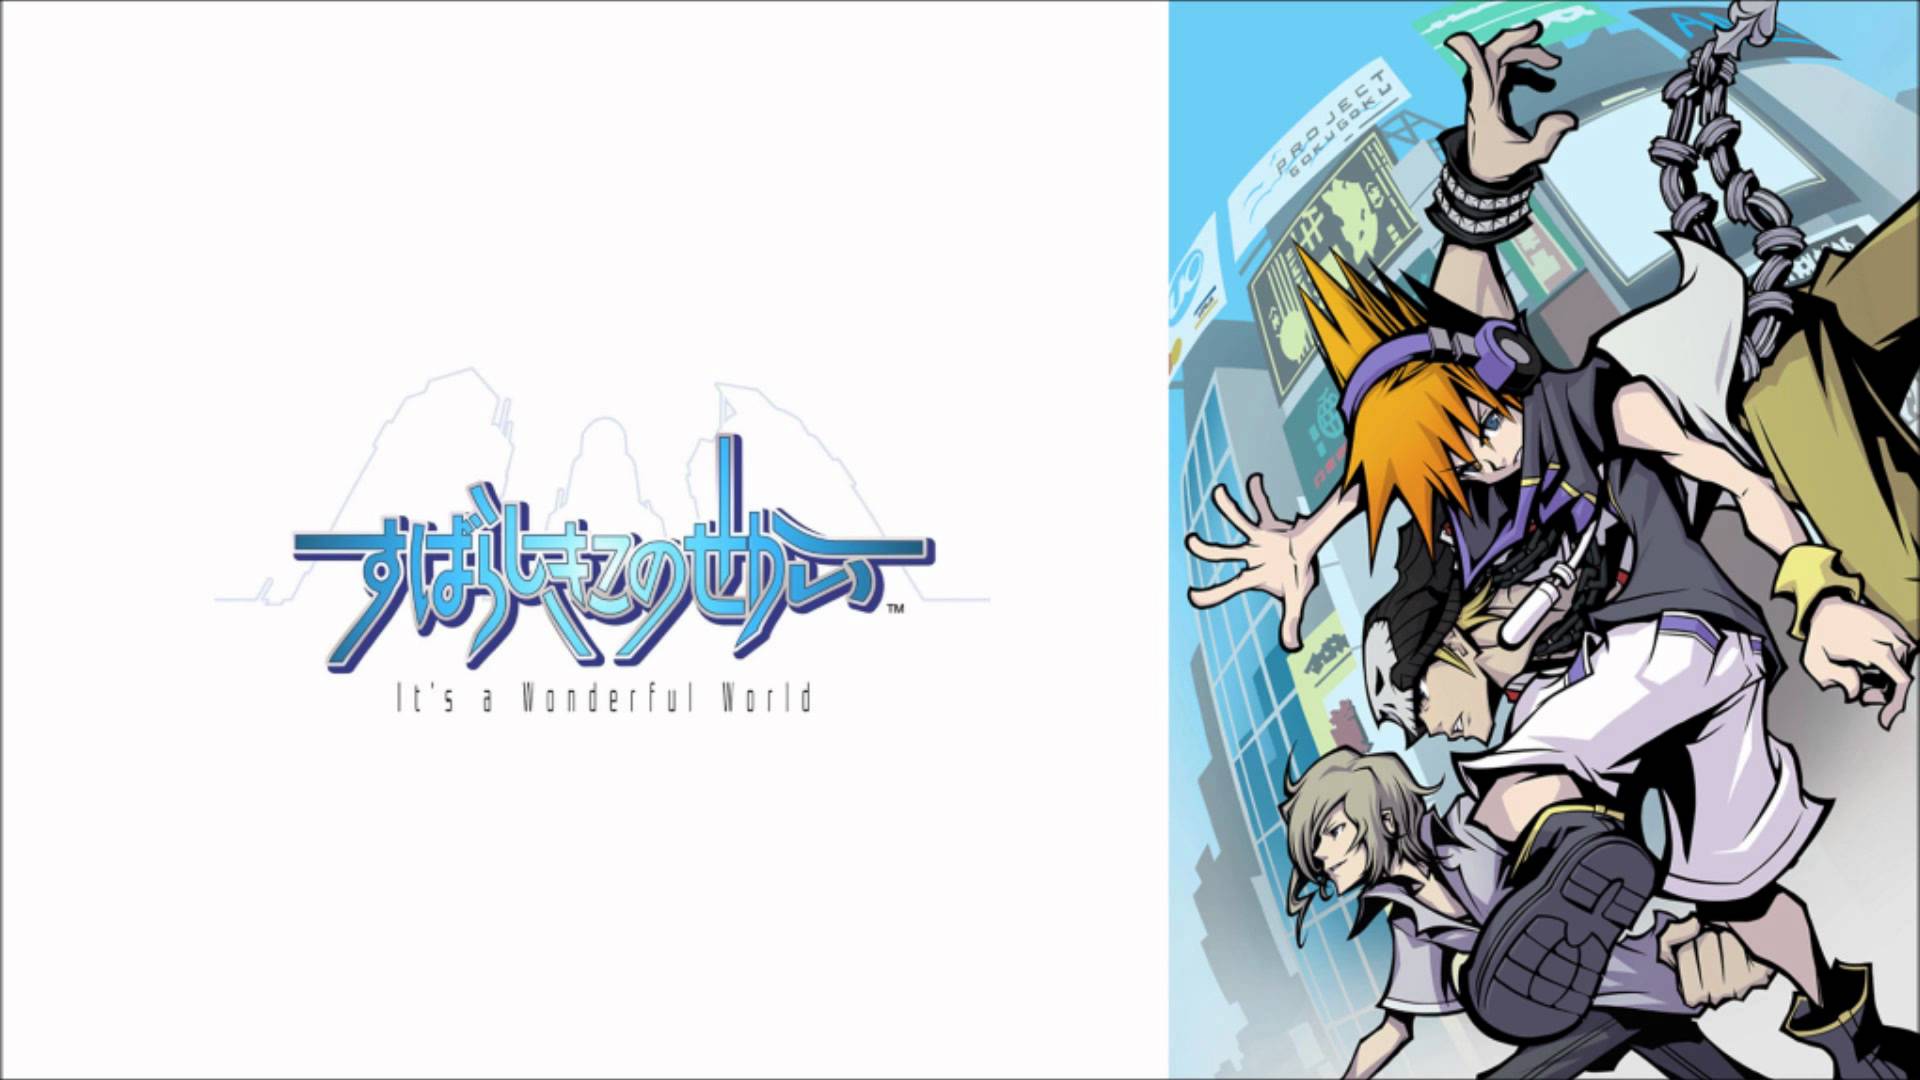 Calling World Ends With You OST